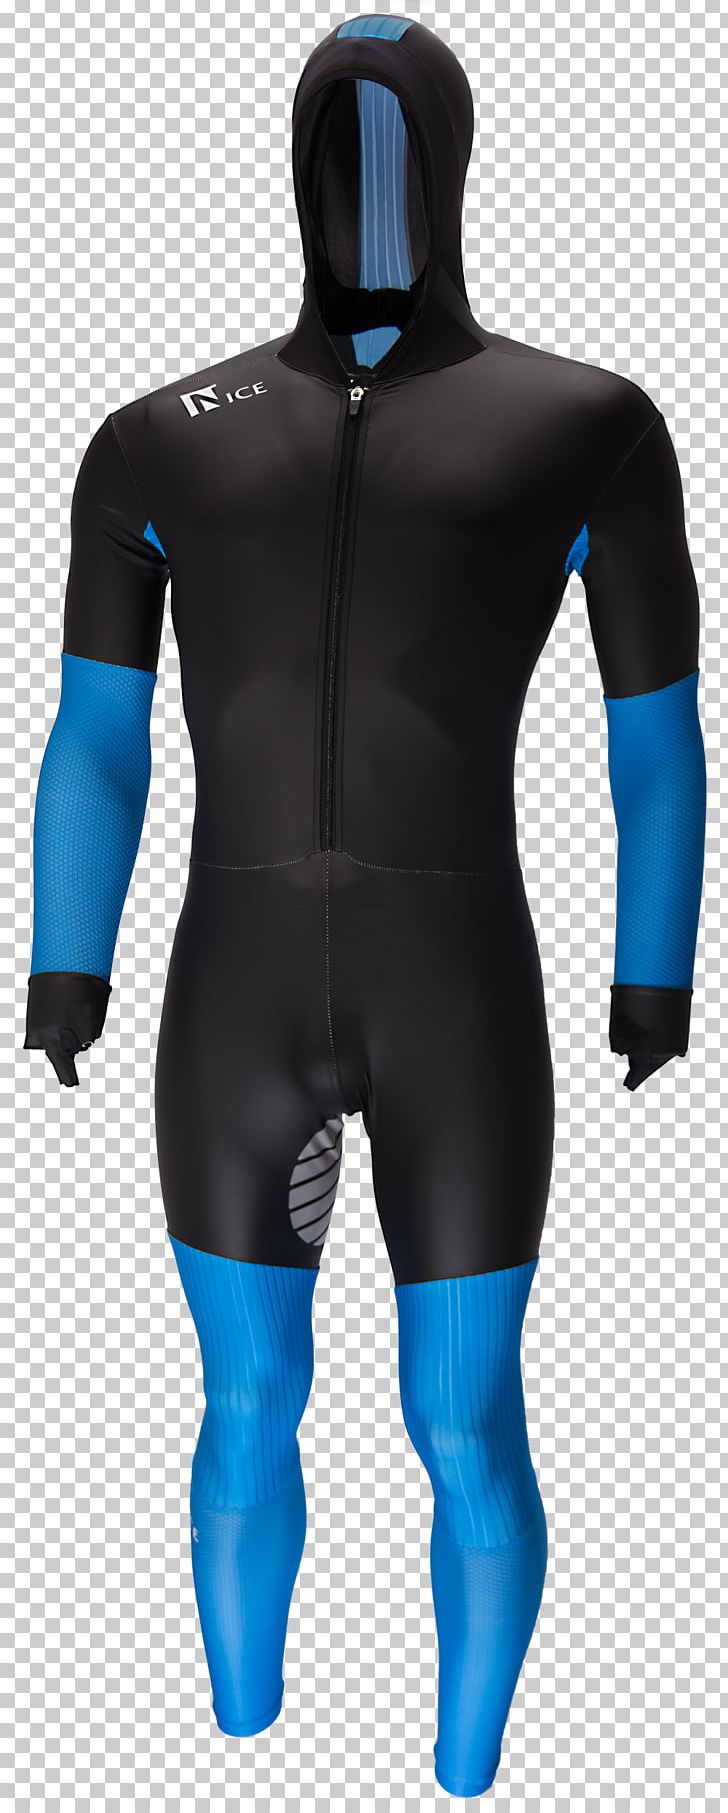 Ice Skating Long Track Speed Skating Suit Schaatspak PNG, Clipart, Blue, Clothing, Dry Suit, Electric Blue, Hood Free PNG Download